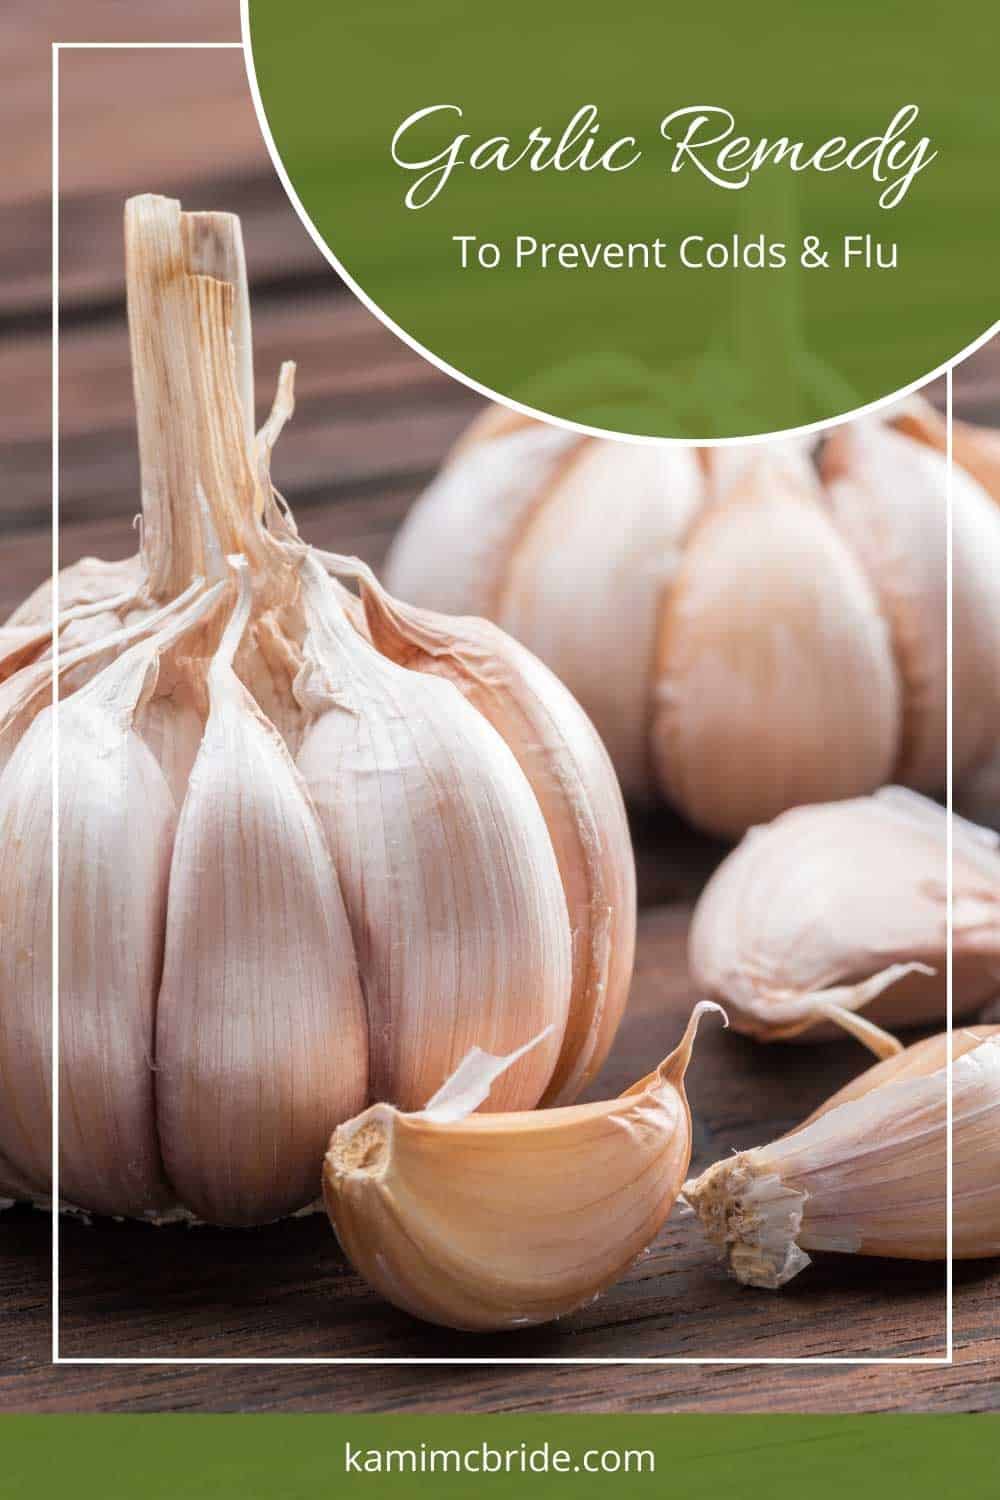 Garlic Remedy to Prevent Colds and Flu